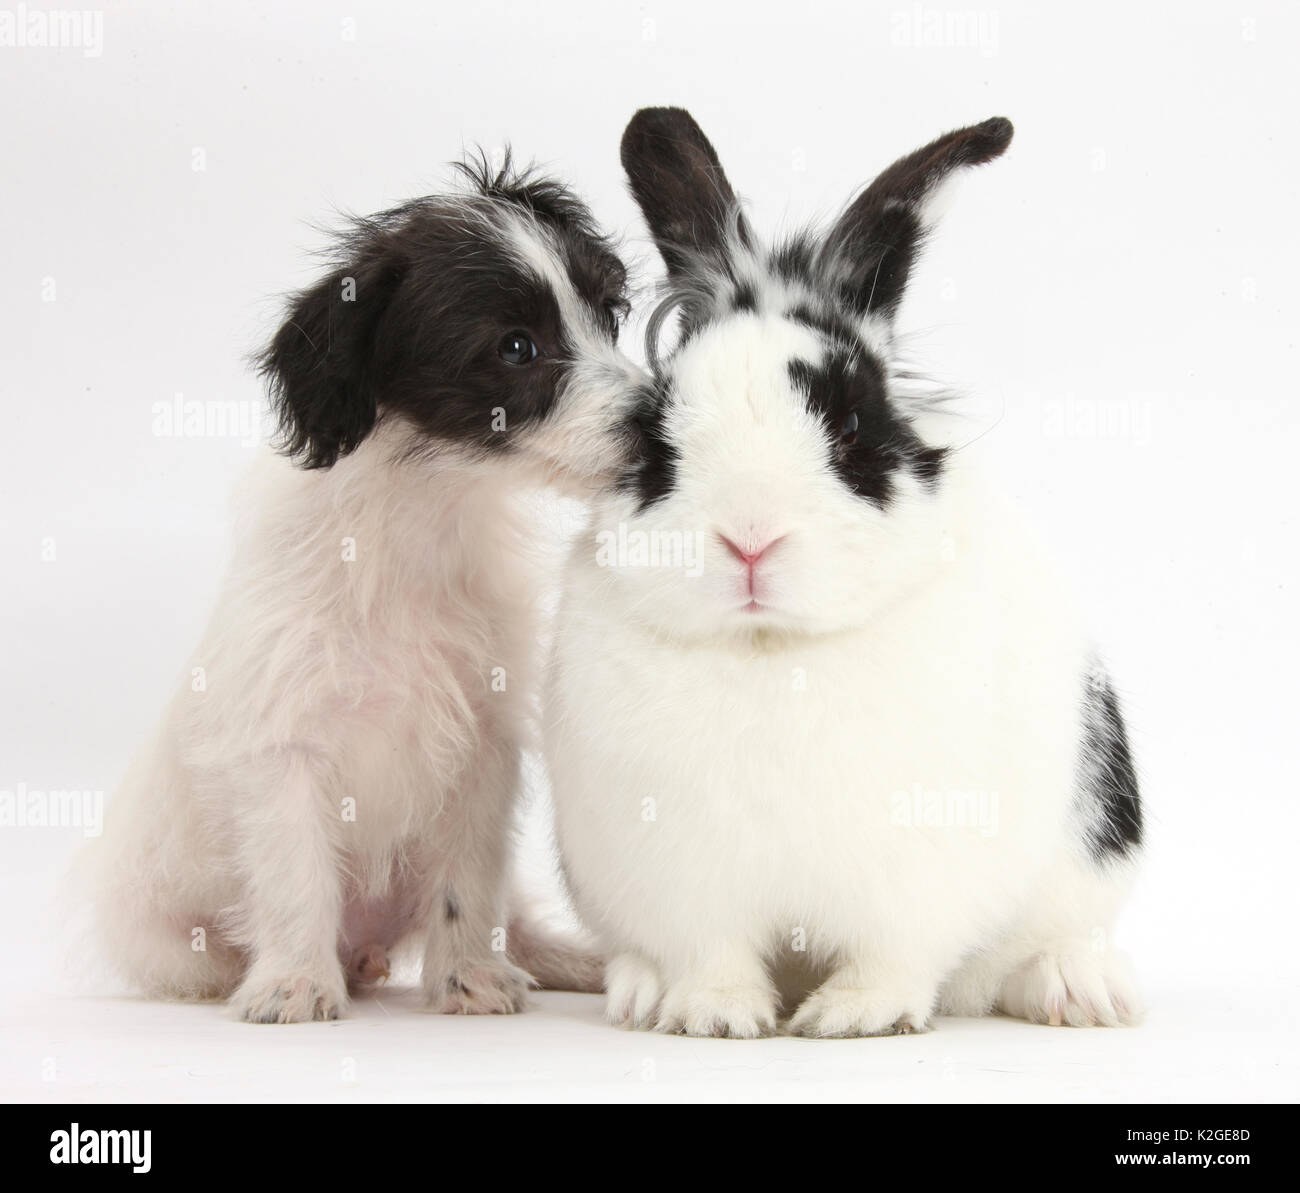 Black-and-white Jack-a-poo, Jack Russell cross Poodle dog pup, age 8 weeks, and black and white rabbit. Stock Photo